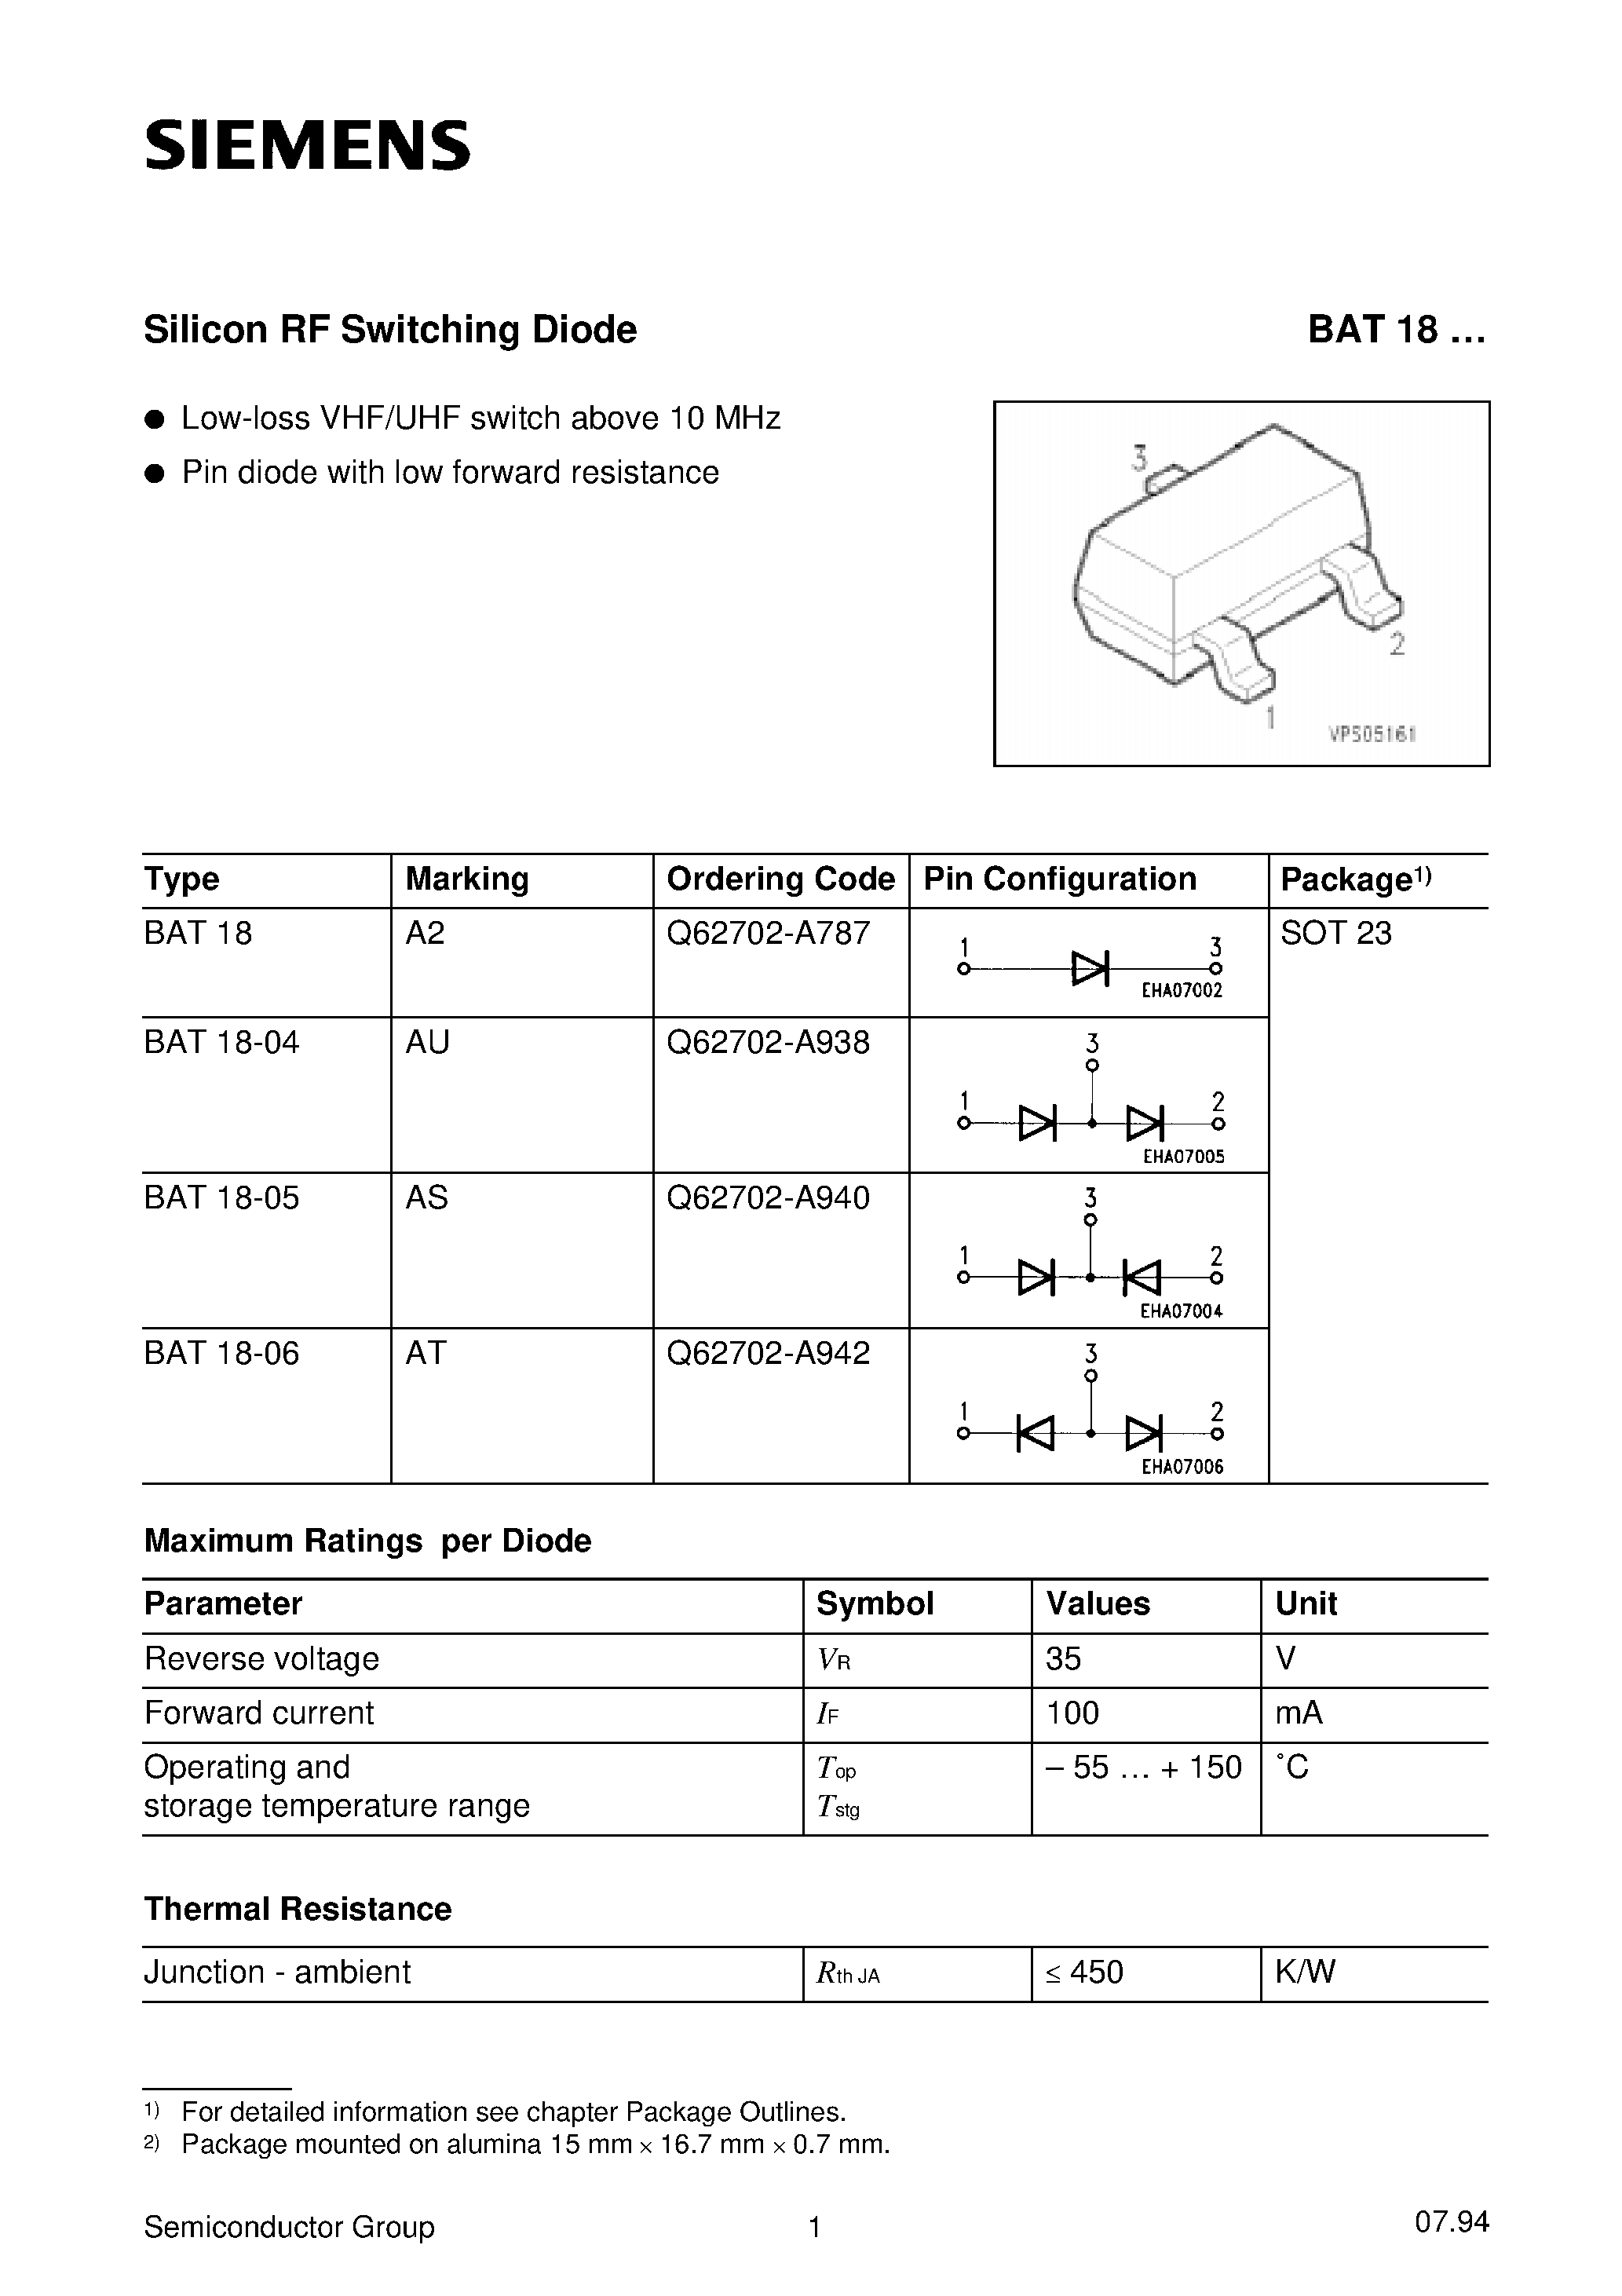 Datasheet BAT18-06 - Silicon RF Switching Diode (Low-loss VHF/UHF switch above 10 MHz Pin diode with low forward resistance) page 1